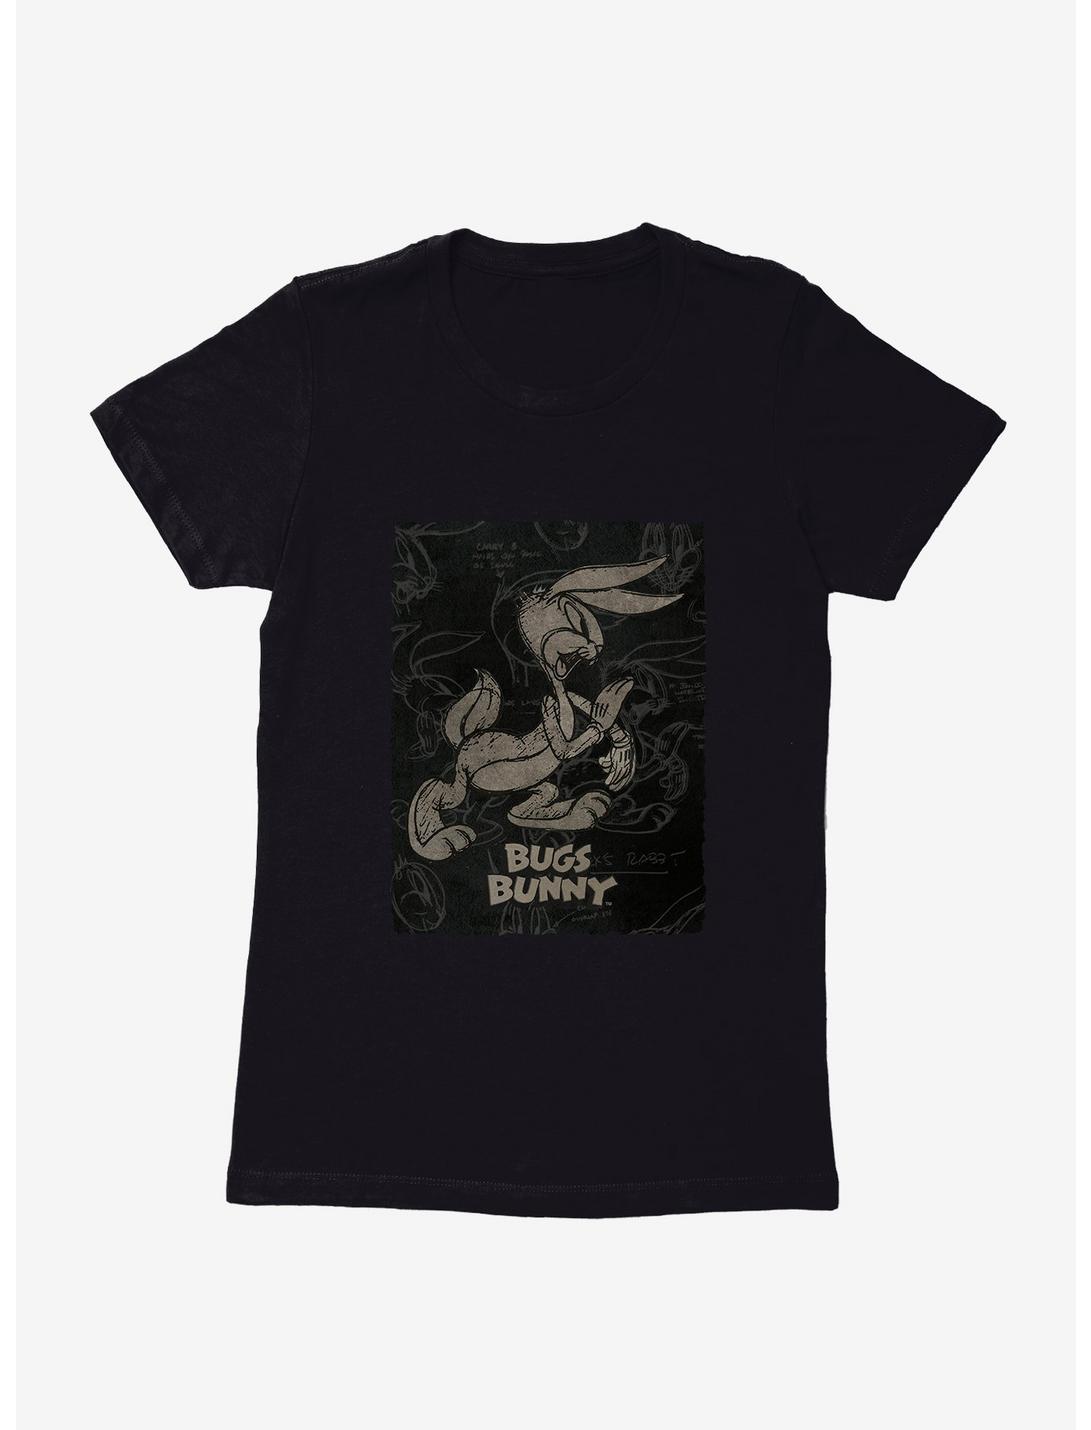 Looney Tunes Merrie Melodies Bugs Bunny Classic Sketch Womens T-Shirt, BLACK, hi-res